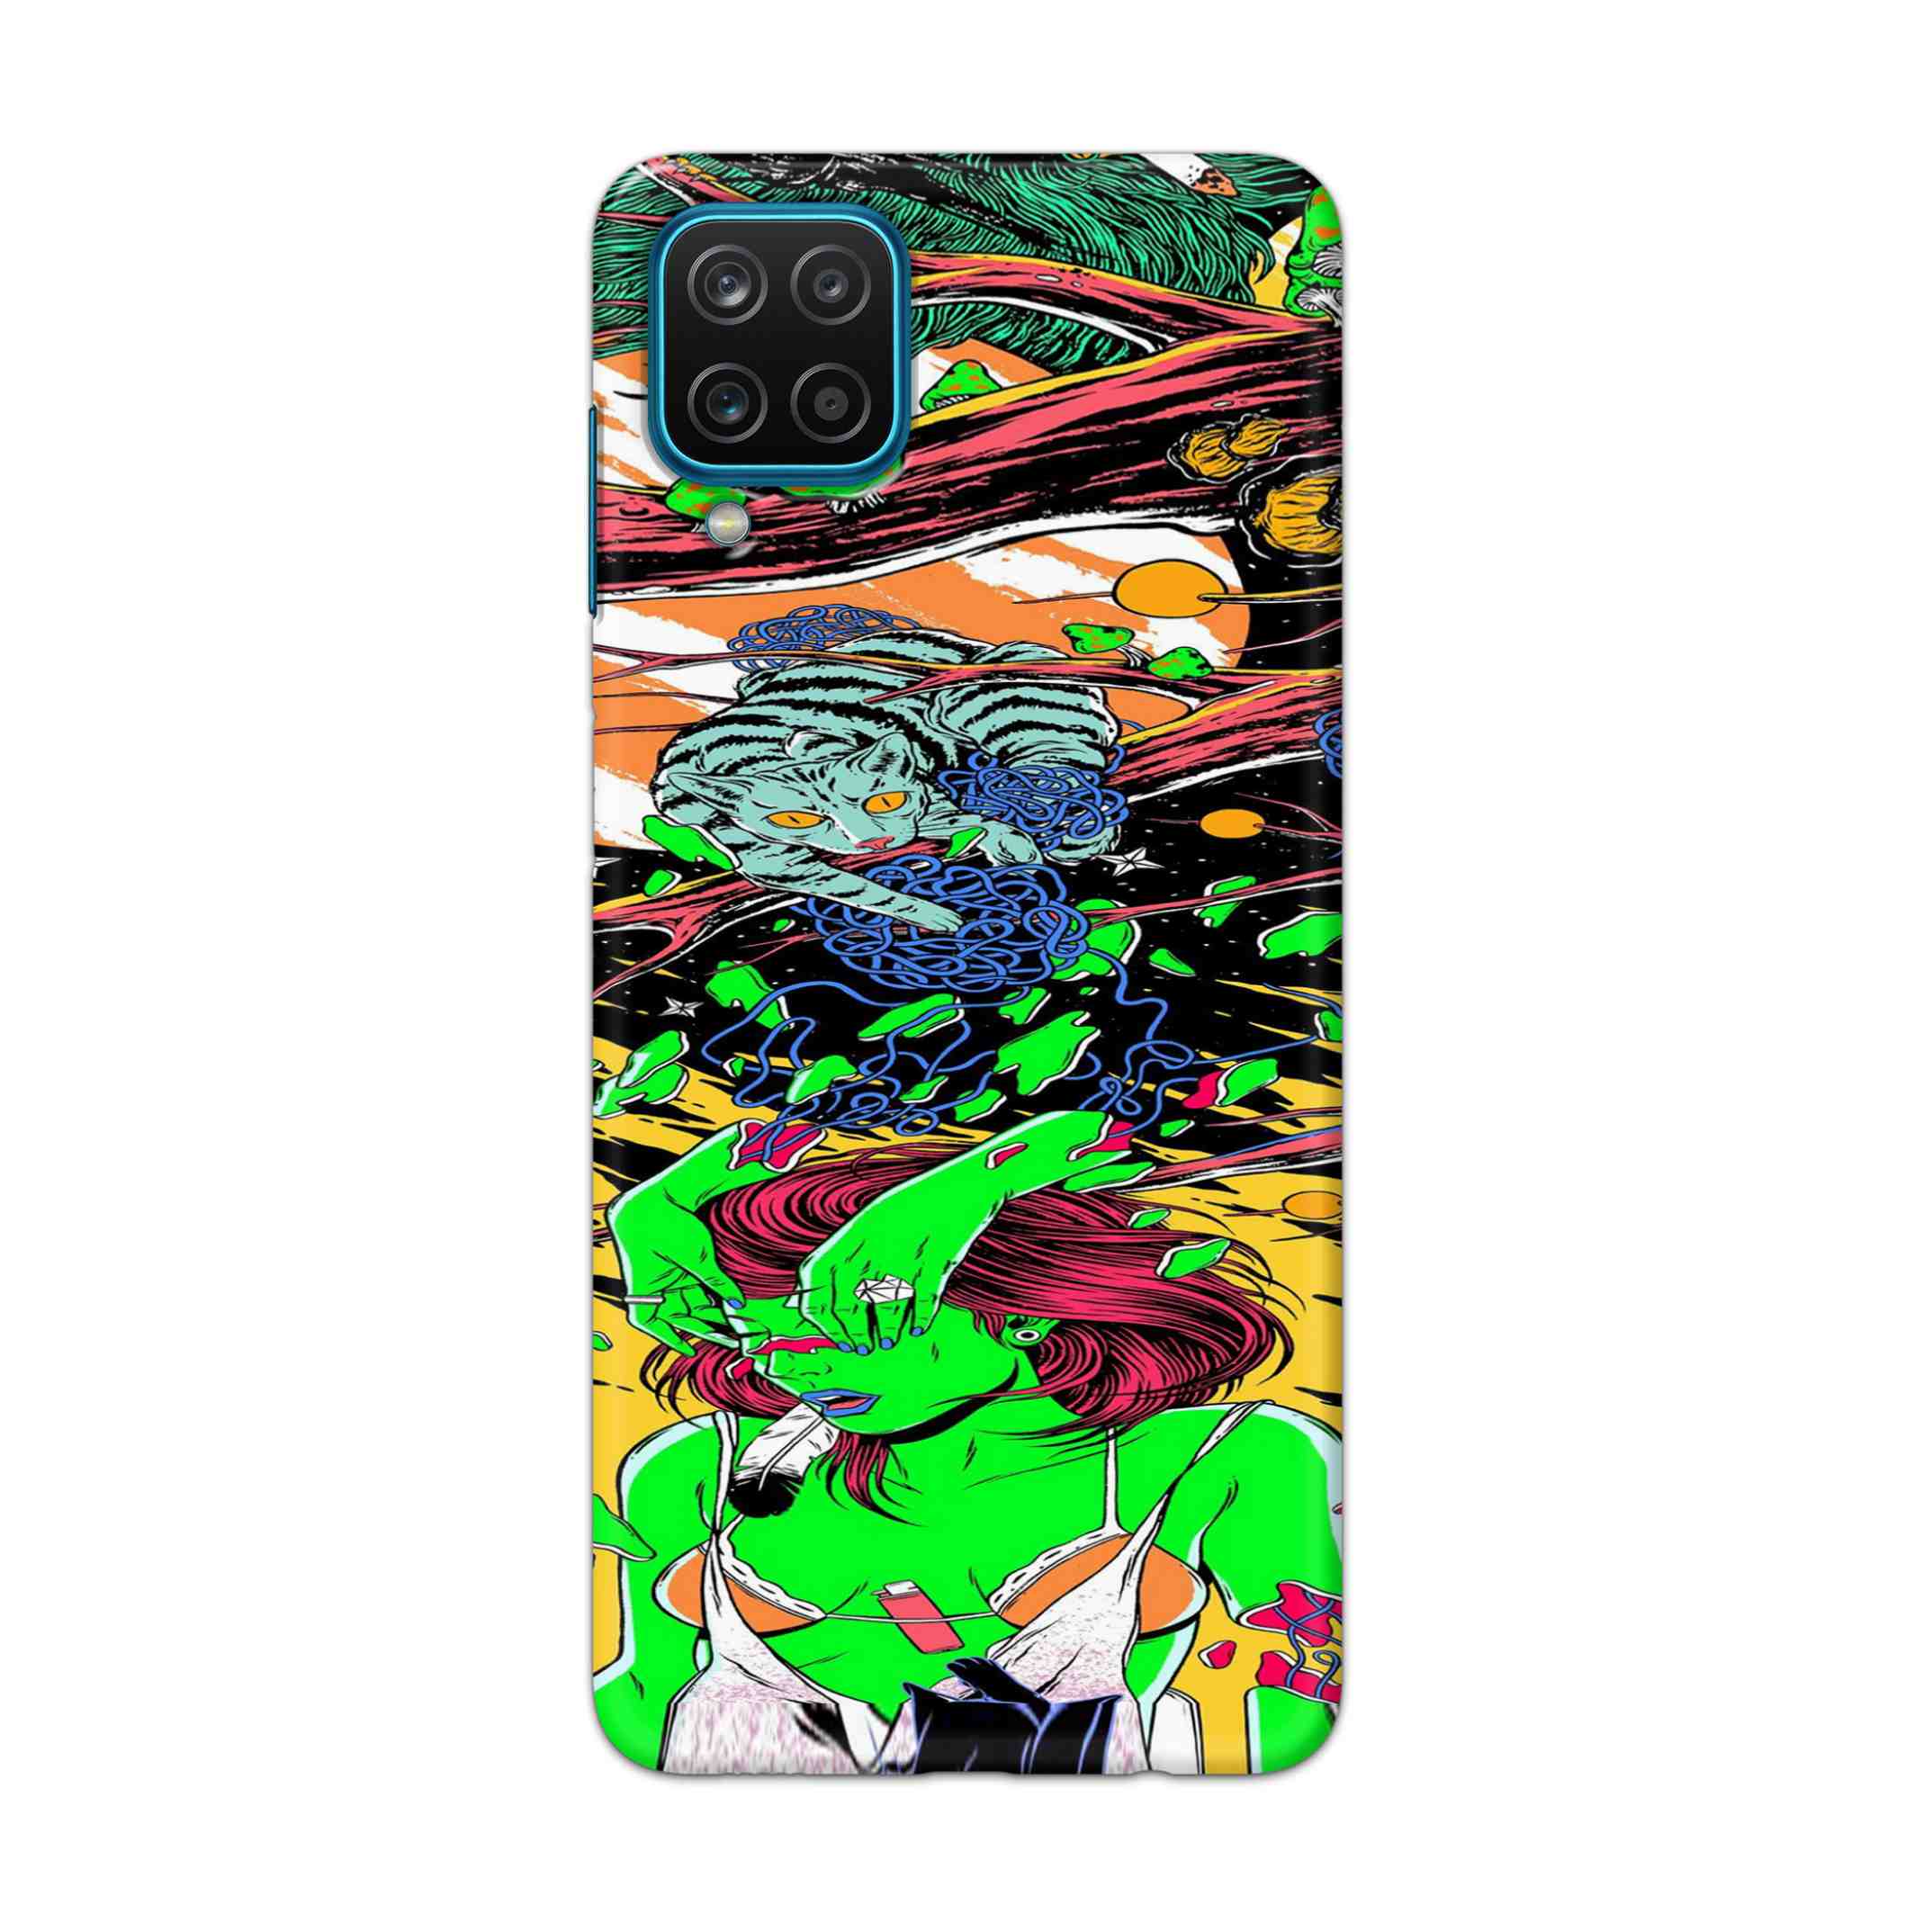 Buy Green Girl Art Hard Back Mobile Phone Case Cover For Samsung Galaxy A12 Online